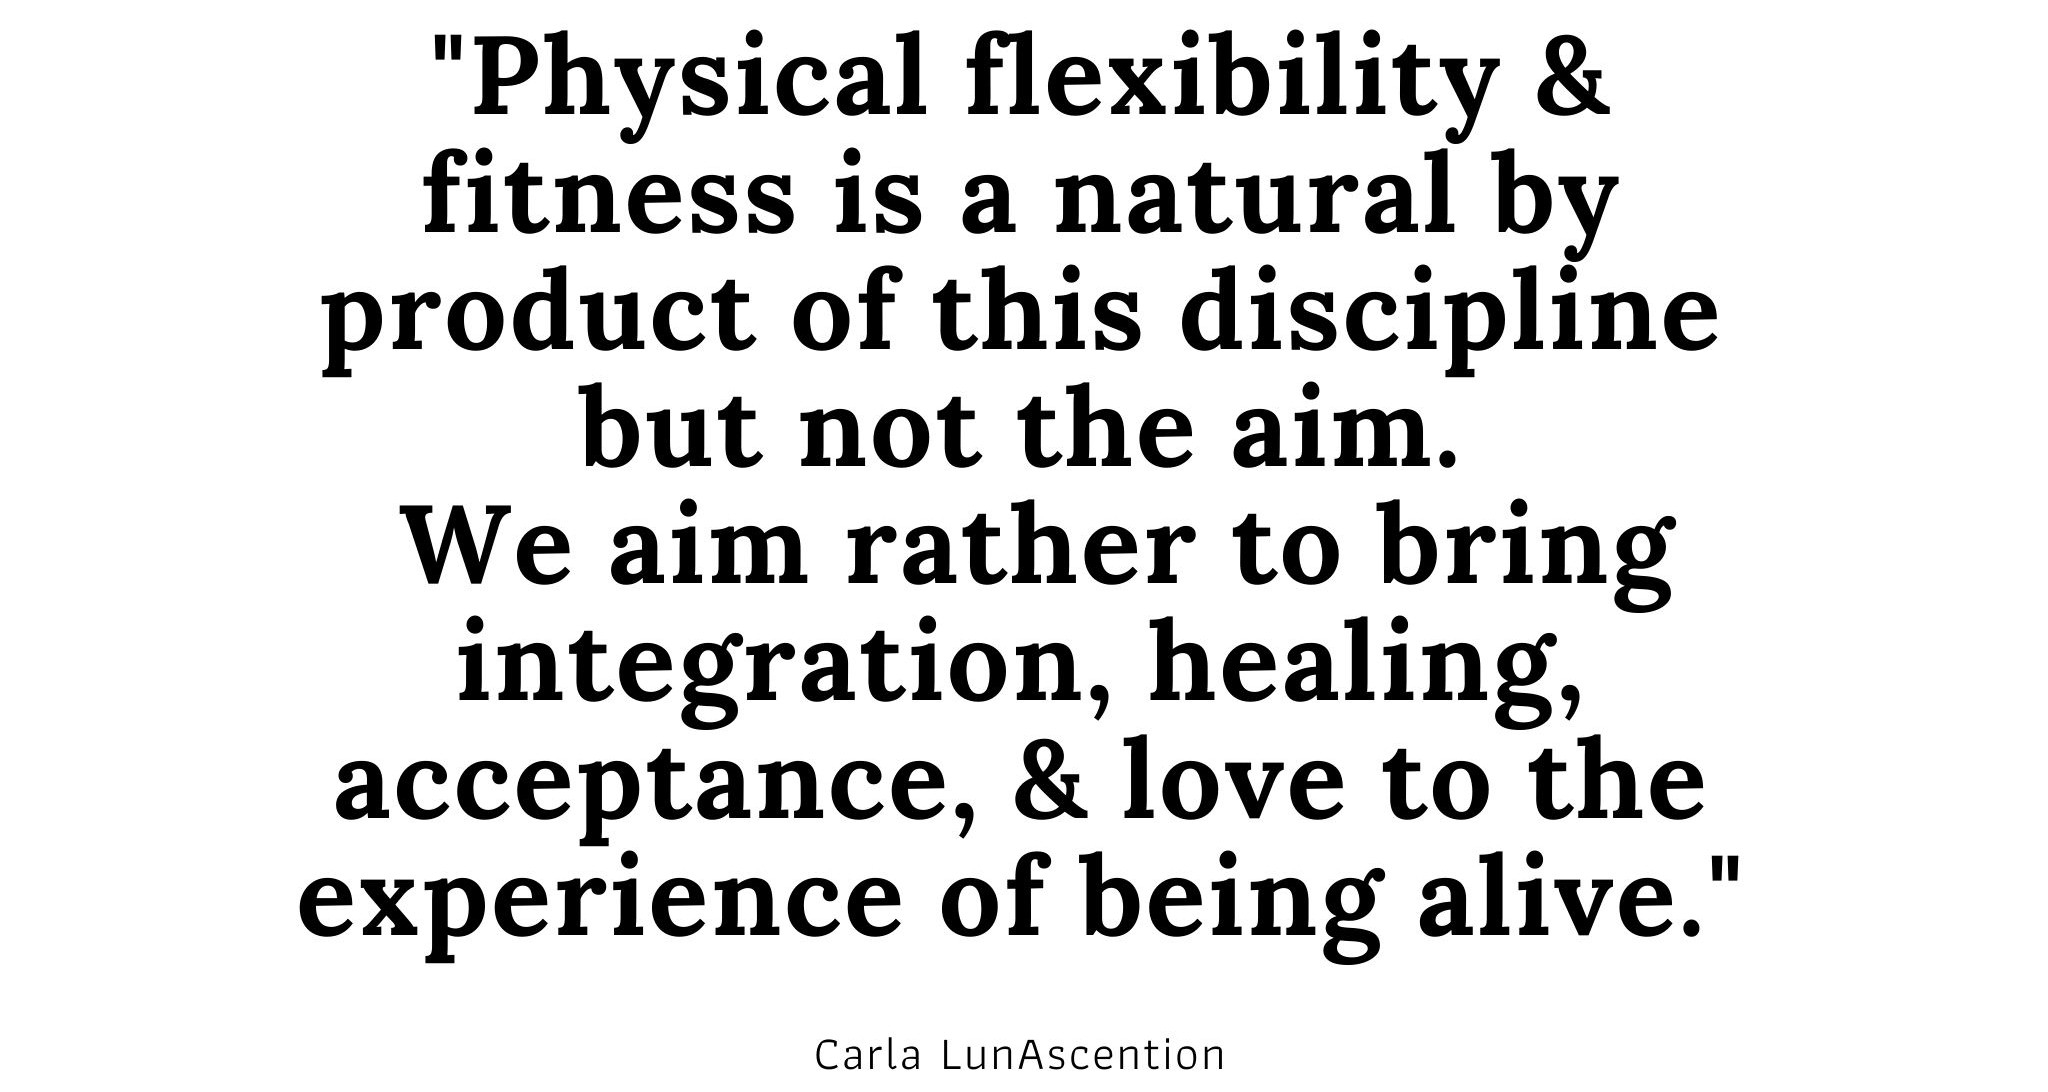 "Physical flexibility & fitness is a natural by product of this discipline but not the aim.  We aim rather to bring integration, healing, acceptance, & love to the experience of being alive." Carla LunAscention